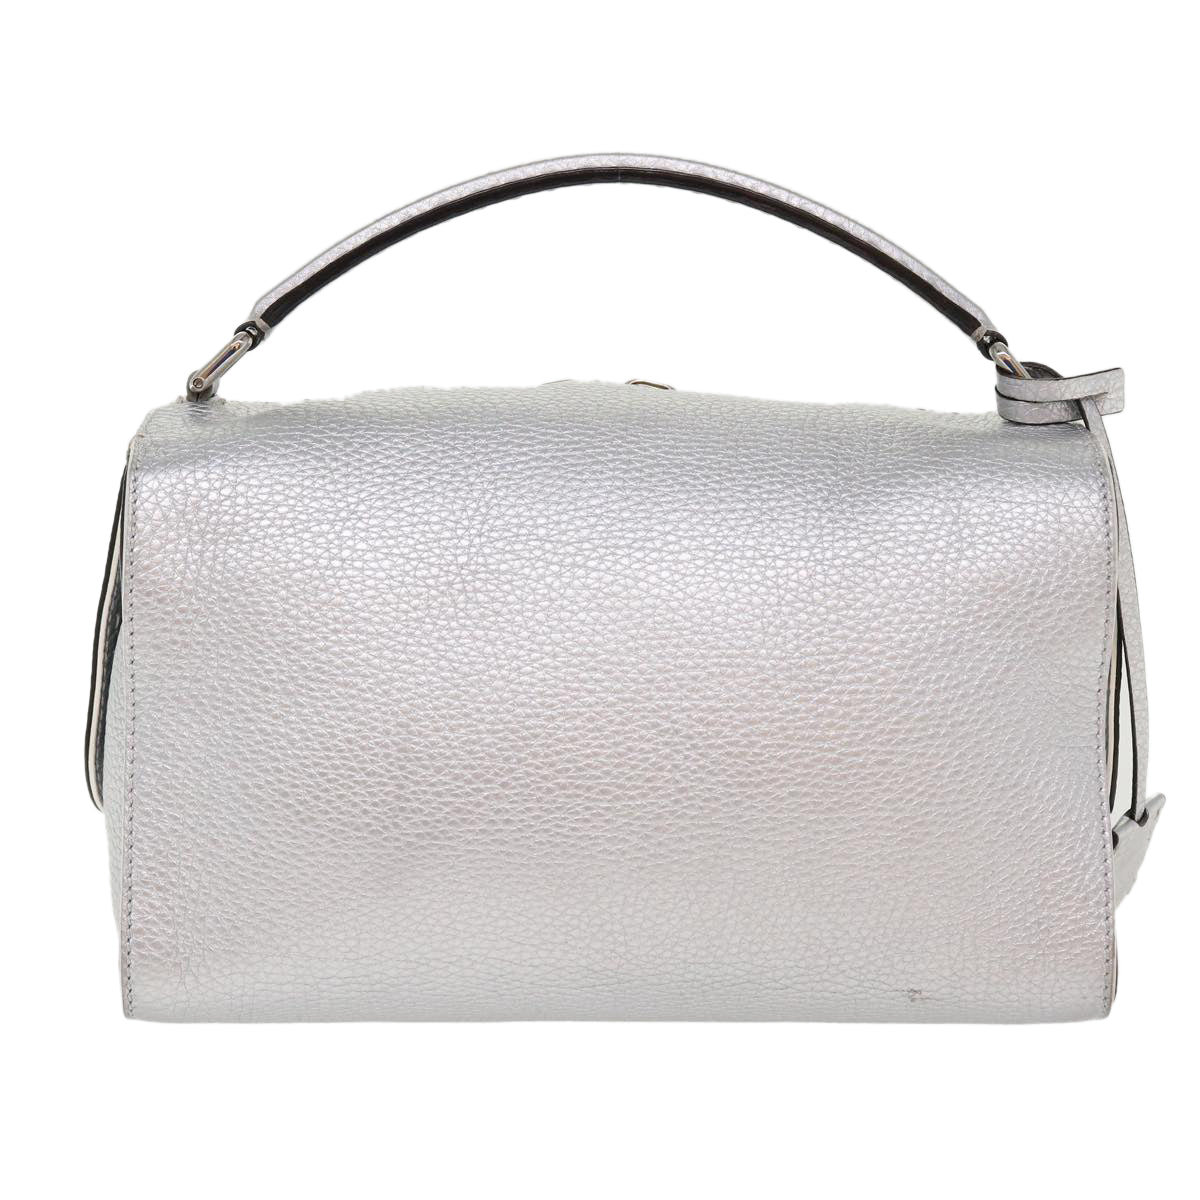 FENDI Hand Bag Leather 2way Silver Auth 38070